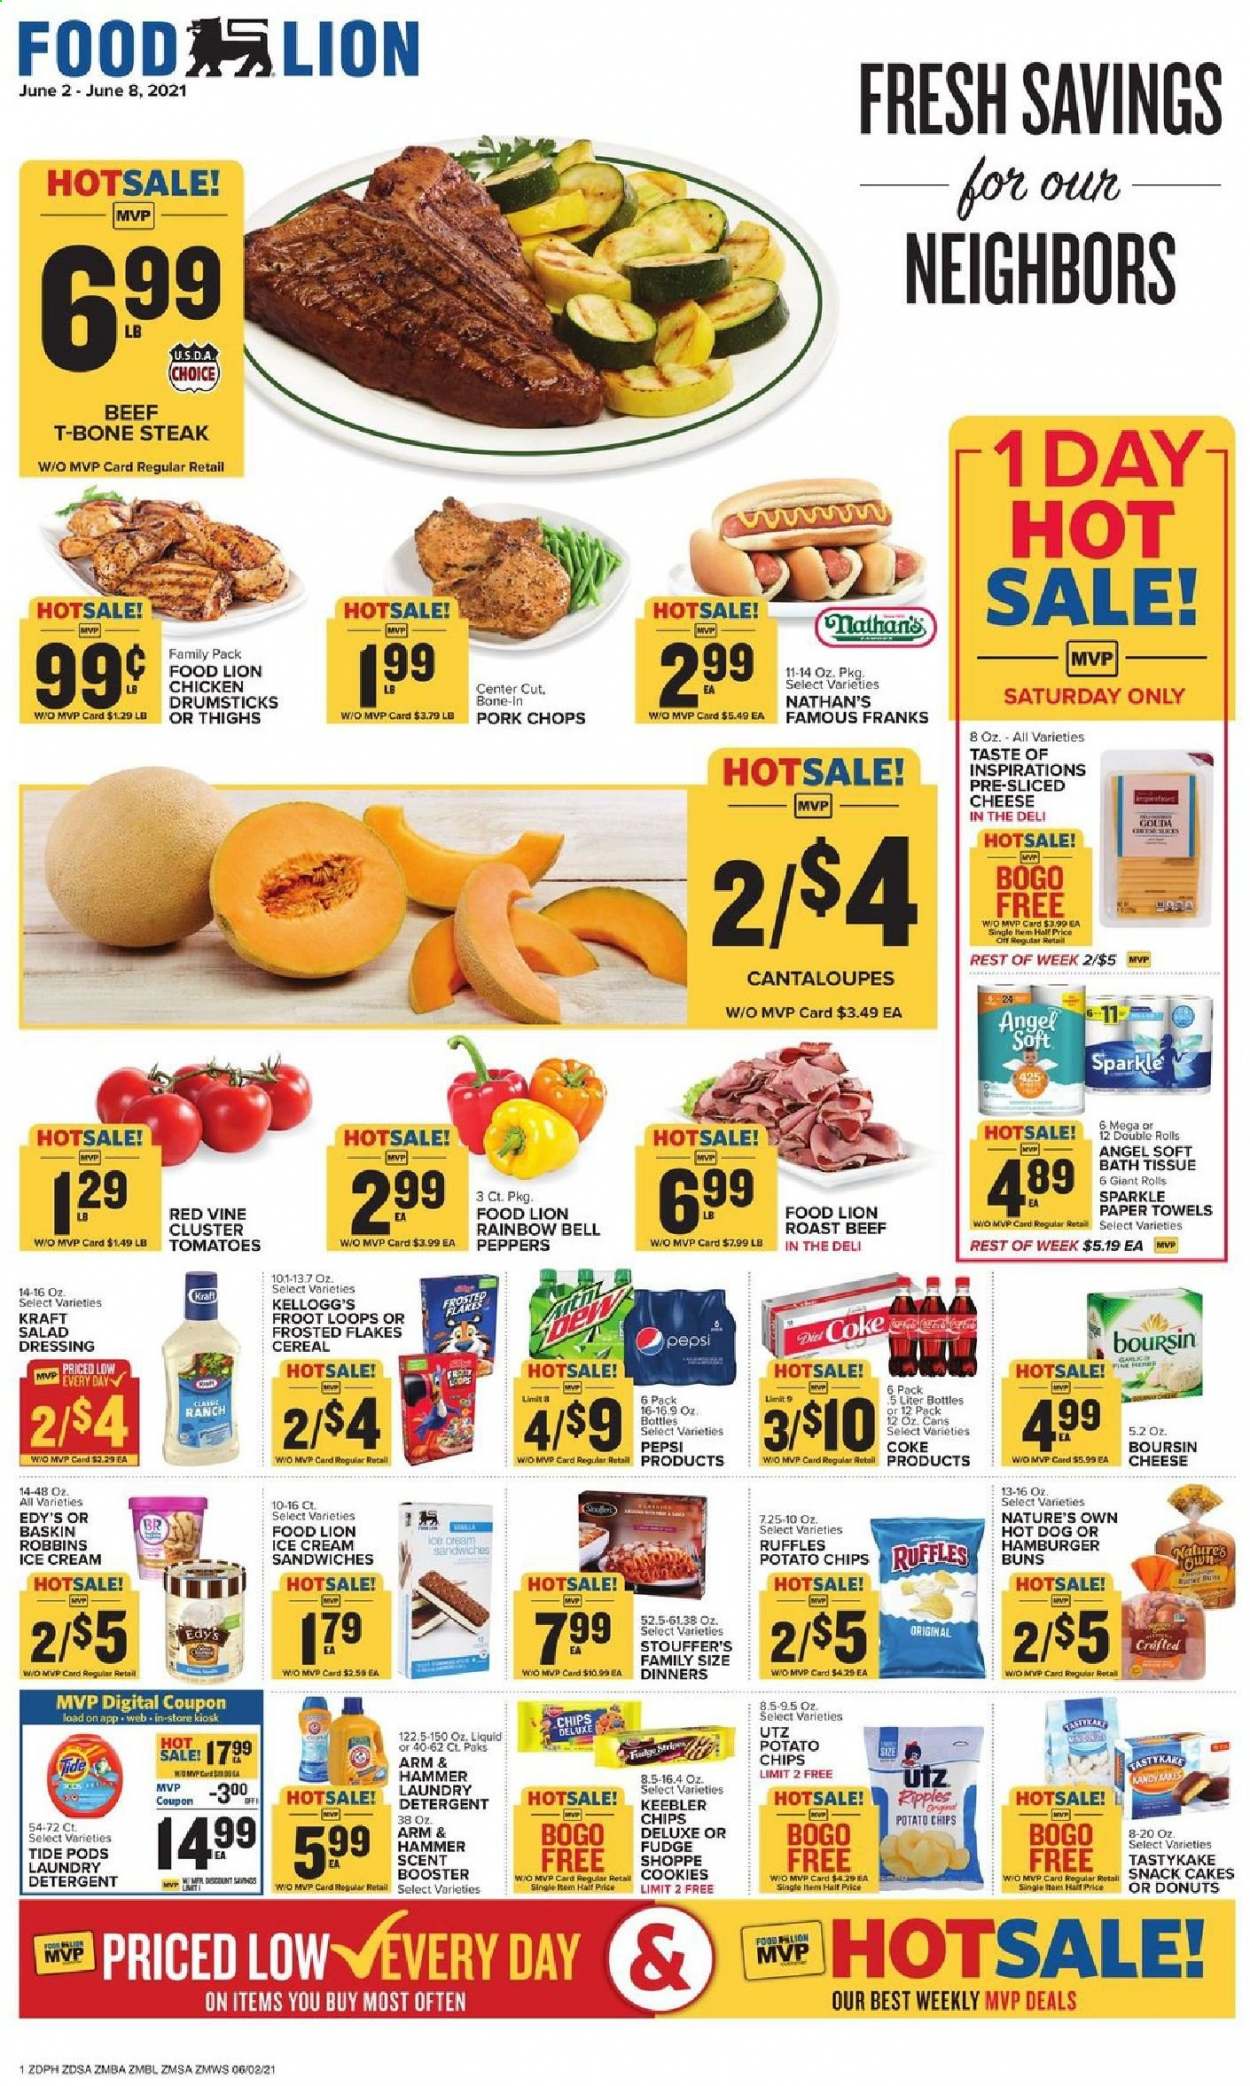 thumbnail - Food Lion Flyer - 06/02/2021 - 06/08/2021 - Sales products - cake, buns, burger buns, donut, bell peppers, cantaloupe, tomatoes, peppers, hot dog, Kraft®, sliced cheese, ice cream, ice cream sandwich, Stouffer's, fudge, snack, Kellogg's, Keebler, potato chips, chips, Ruffles, ARM & HAMMER, cereals, Frosted Flakes, salad dressing, dressing, Pepsi, chicken drumsticks, beef meat, t-bone steak, steak, roast beef, pork chops, pork meat, bath tissue, kitchen towels, paper towels, detergent, Tide, laundry detergent, Nature's Own. Page 1.